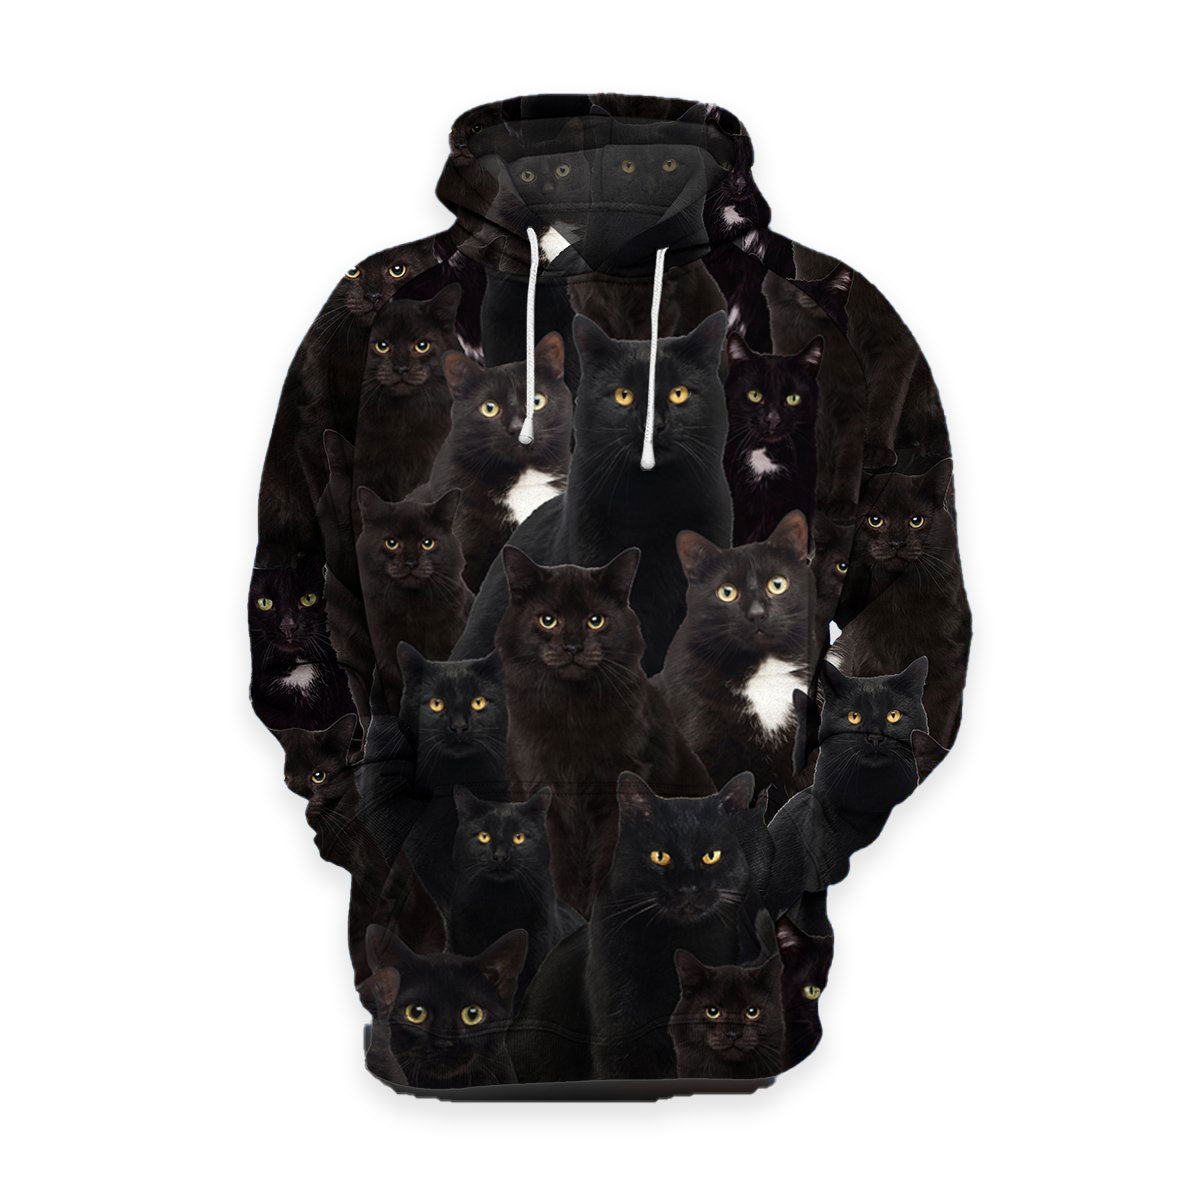 Gearhumans Black Cats - 3D All Over Printed Shirt